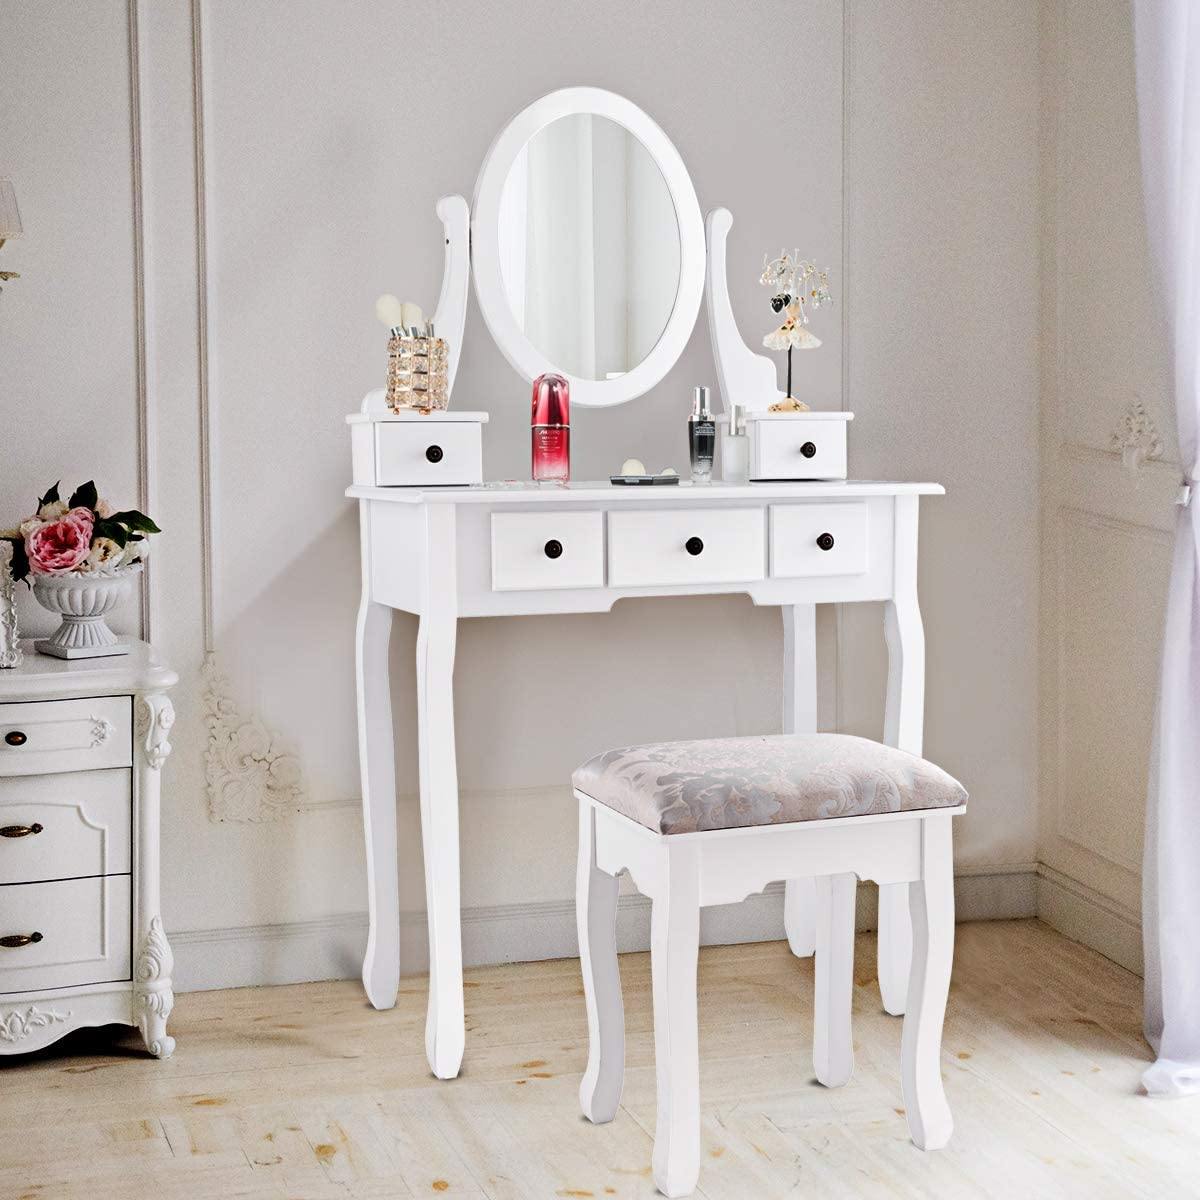 Vanity Set with Oval Mirror and 5 Drawers Girls Women Makeup Organizer Table, White - Giantexus